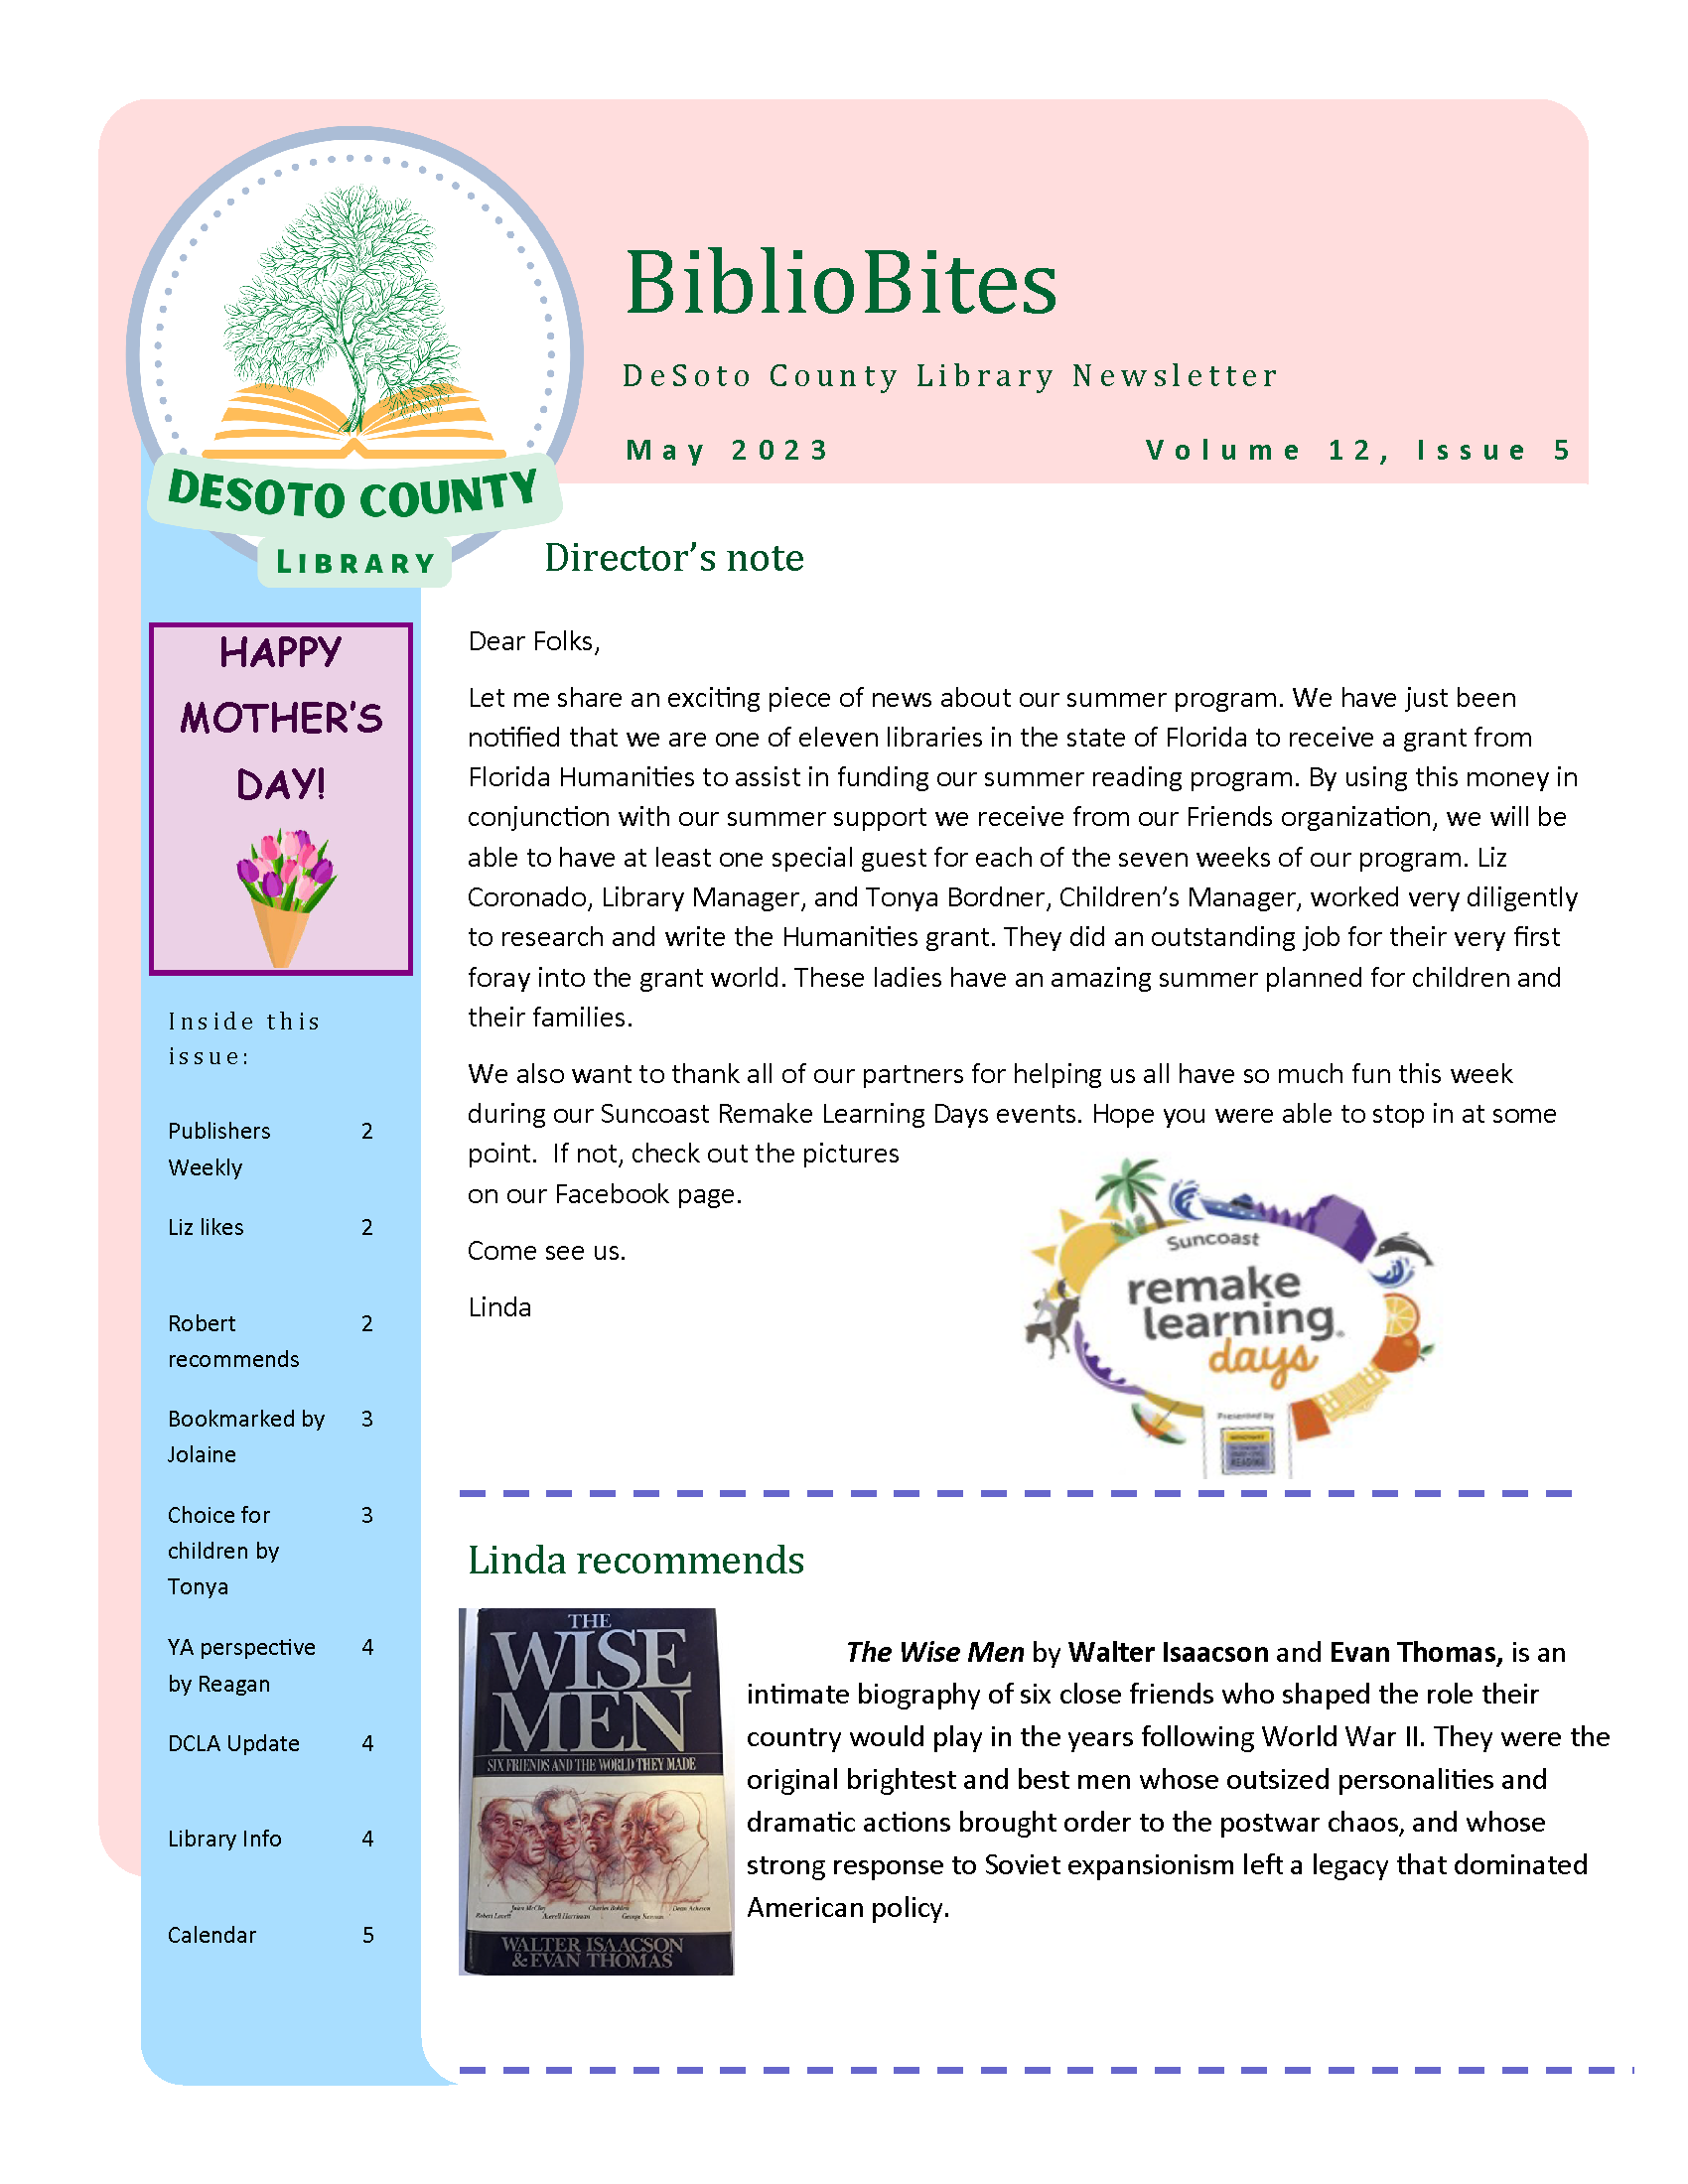 Page 1 of newsletter - available in link as a downloadable, readable PDF